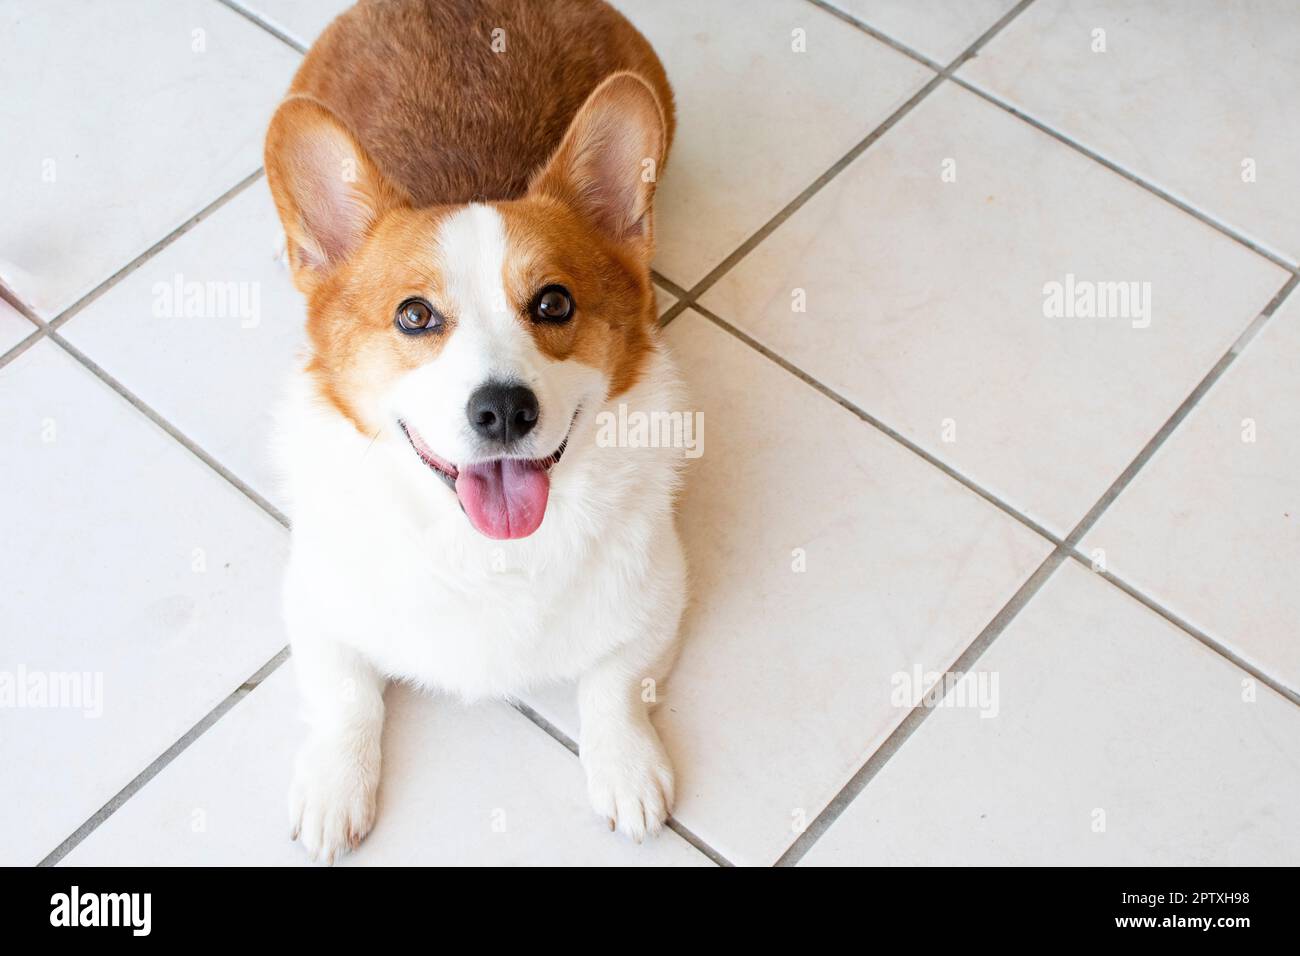 Portrait of Pembroke Welsh Corgi. Portrait of the dog looking at the camera Stock Photo